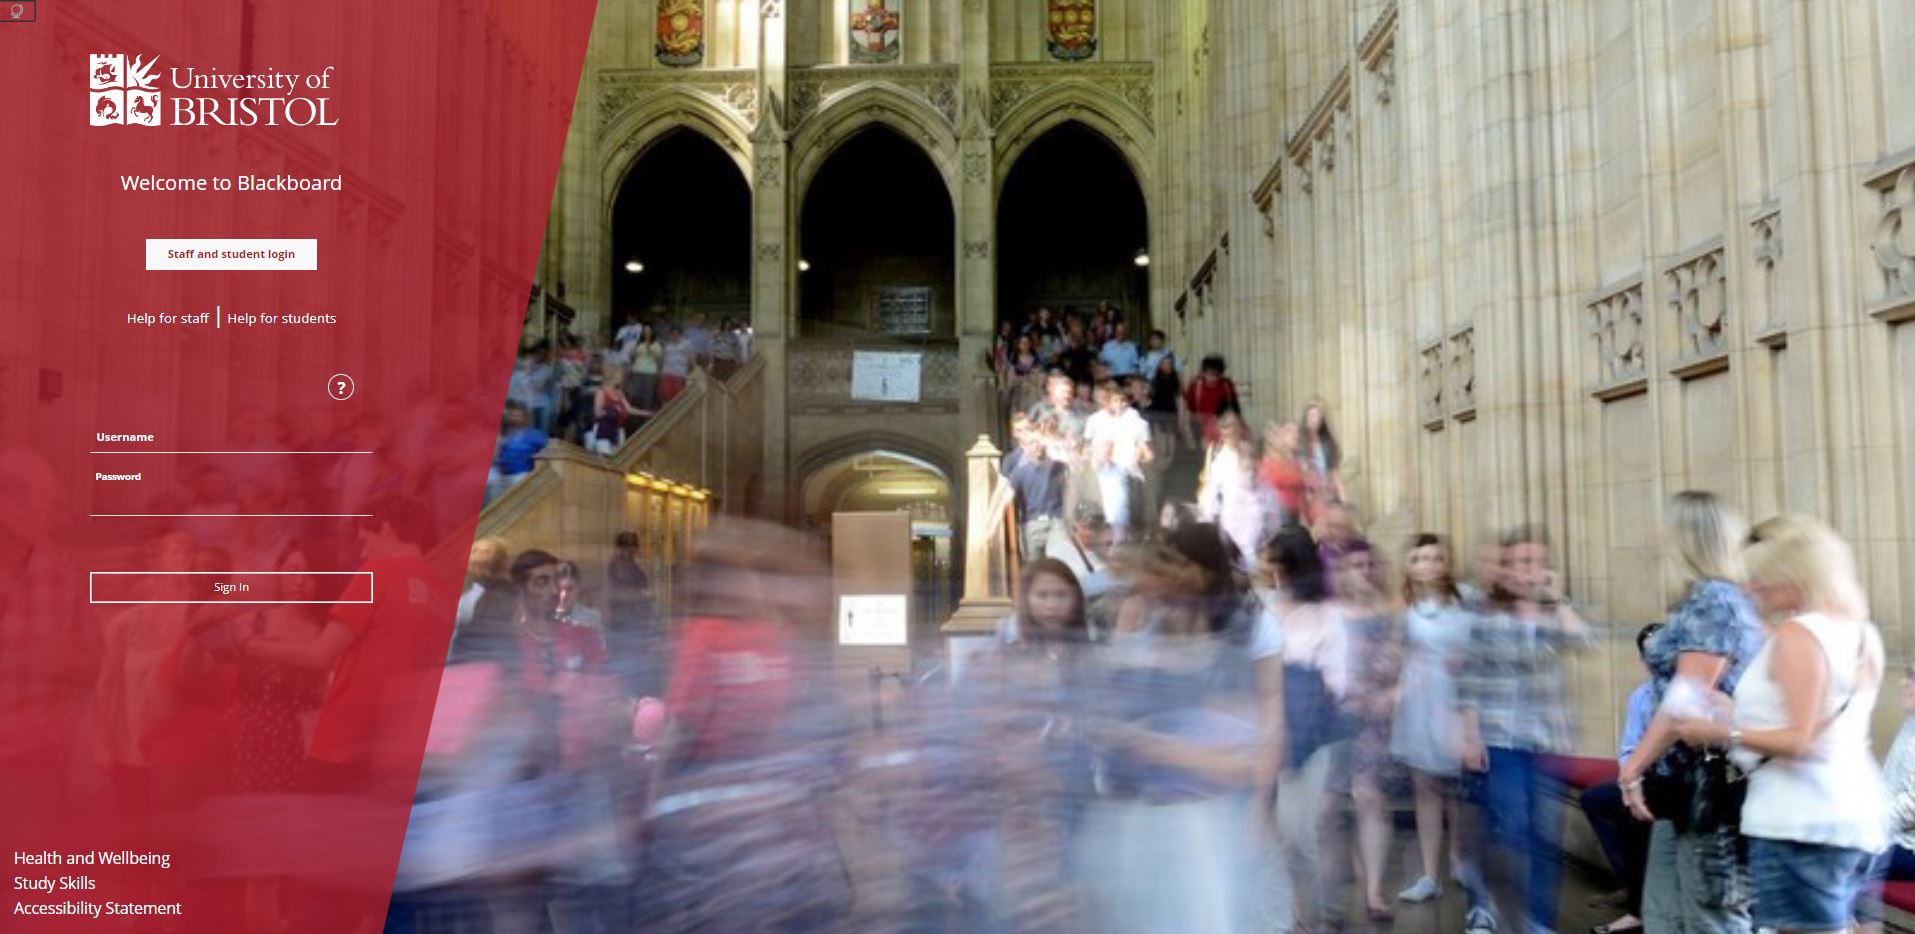 Photo of students in a University of Bristol building. On top of a red overlay on the left, there is a button for staff and student login and another button for guests. There are 2 links for help for staff and students respectively under the first button and more helpful links at the bottom left of the page.